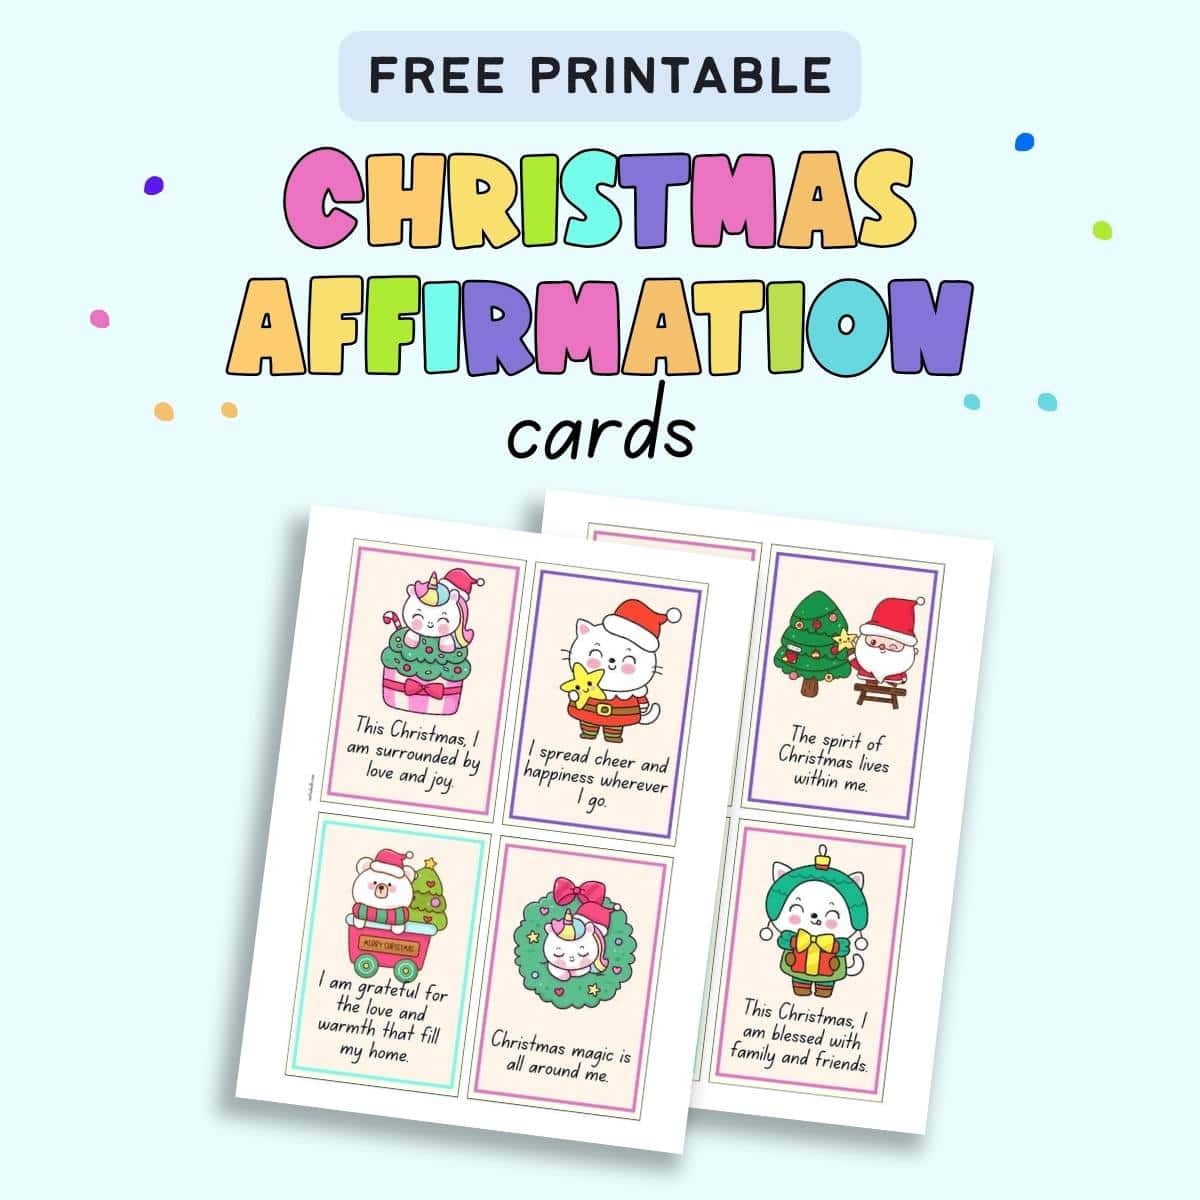 Text "free printable Christmas affirmation cards" with a preview of two pages of printable affirmation cards with cute Christmas clip art